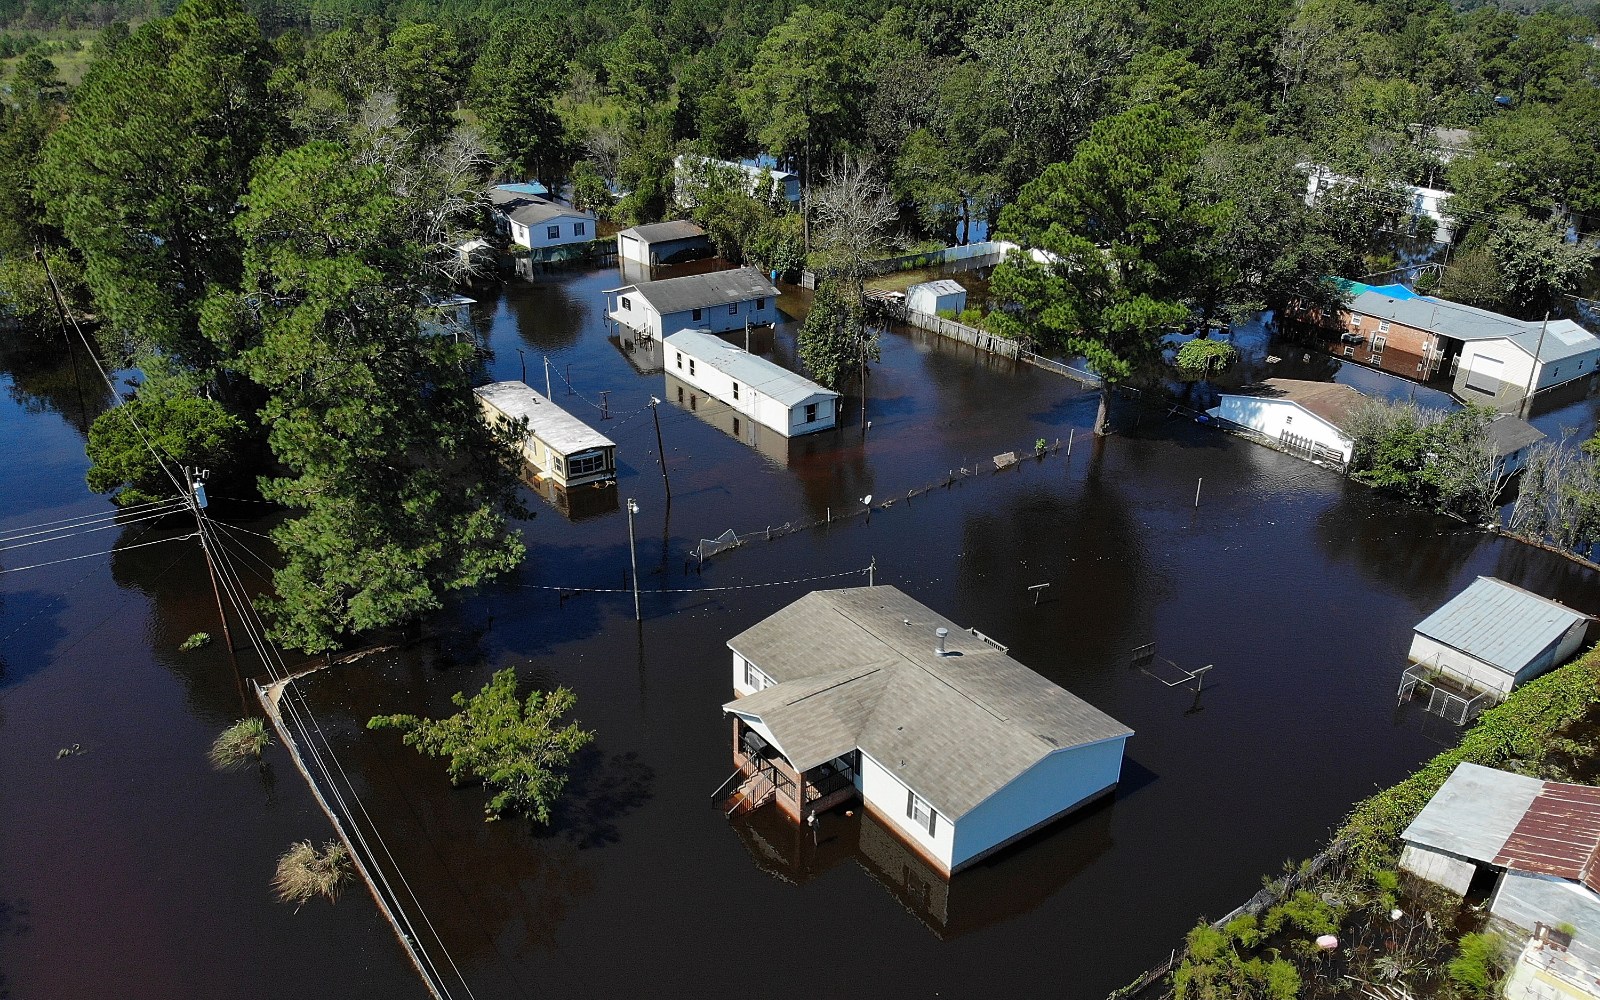 Photo of homes submerged in dark water.